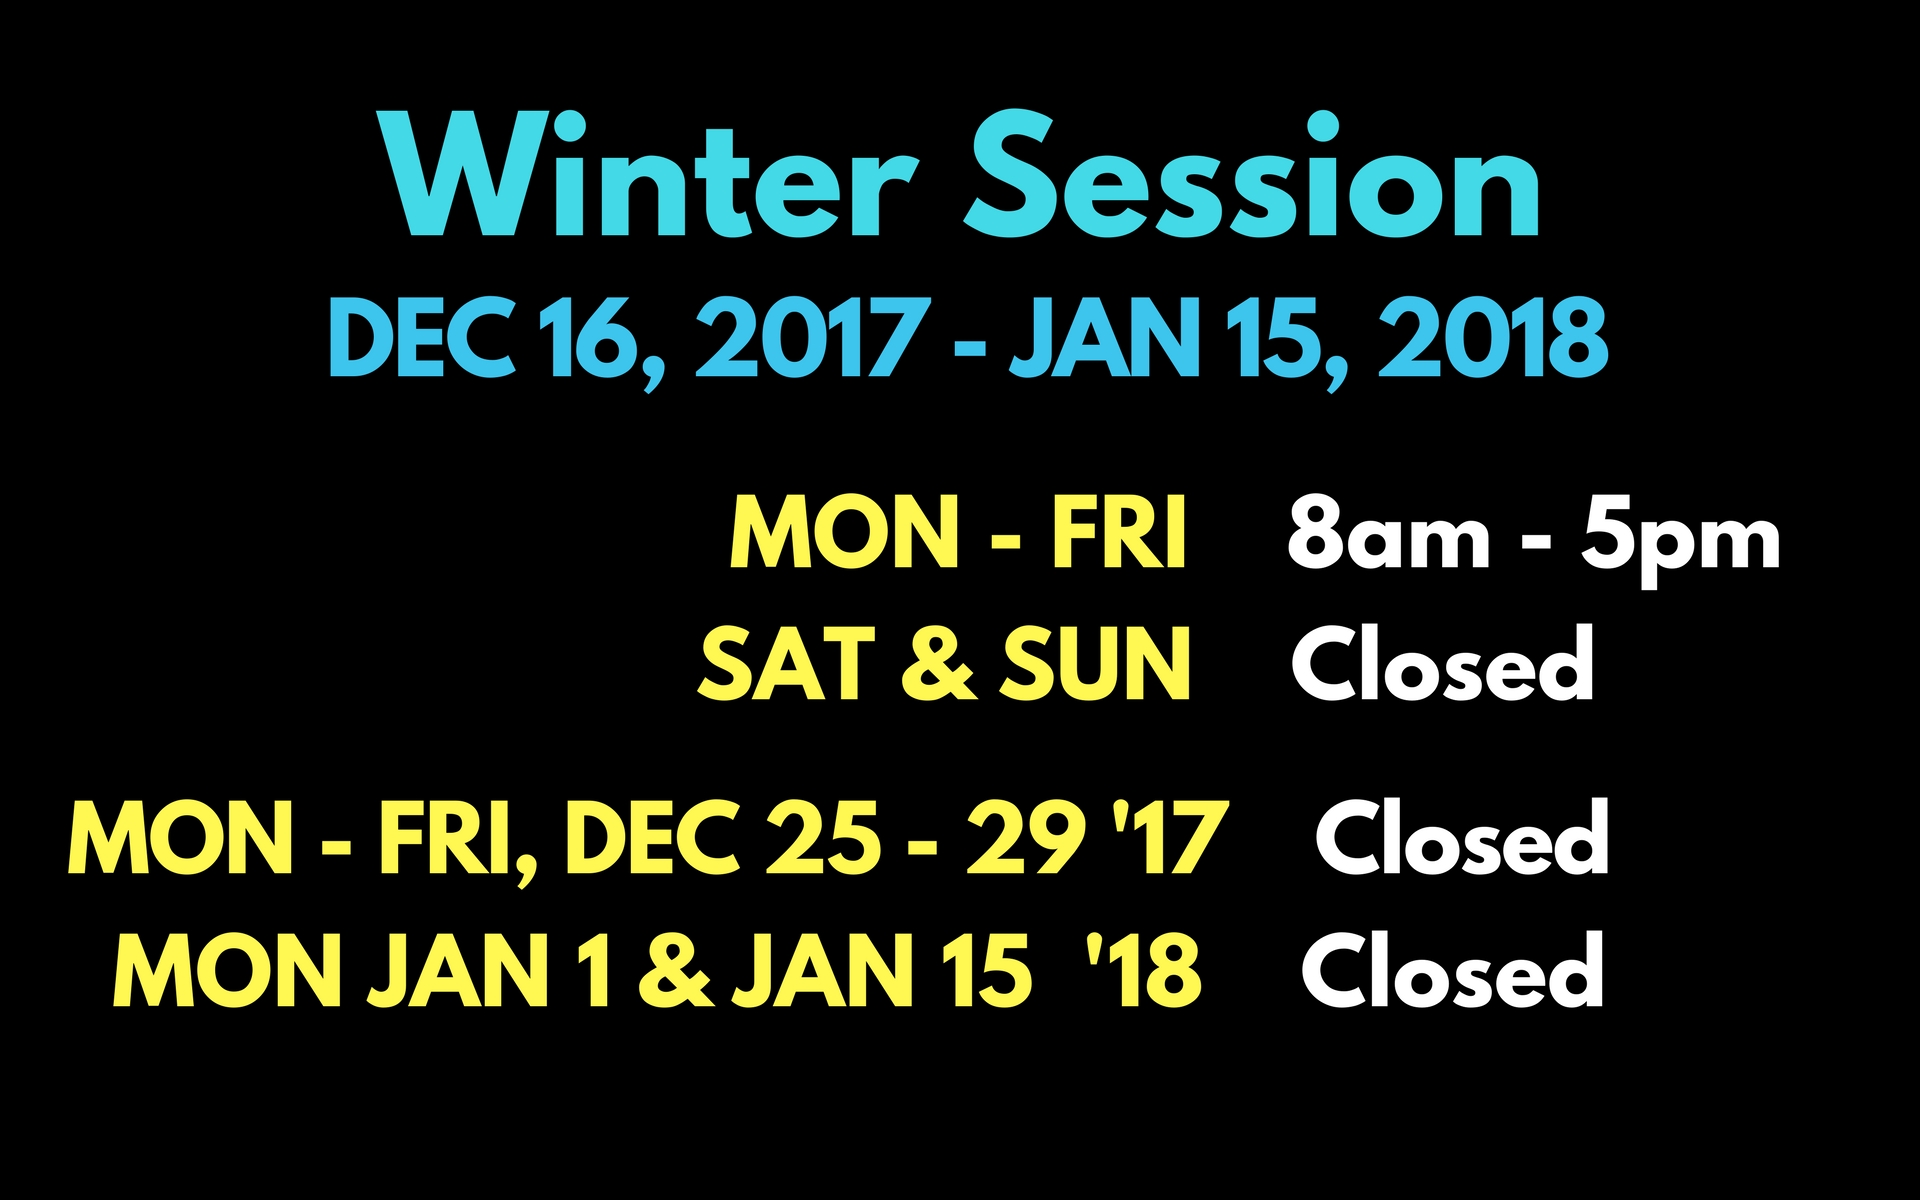 Winter session hours